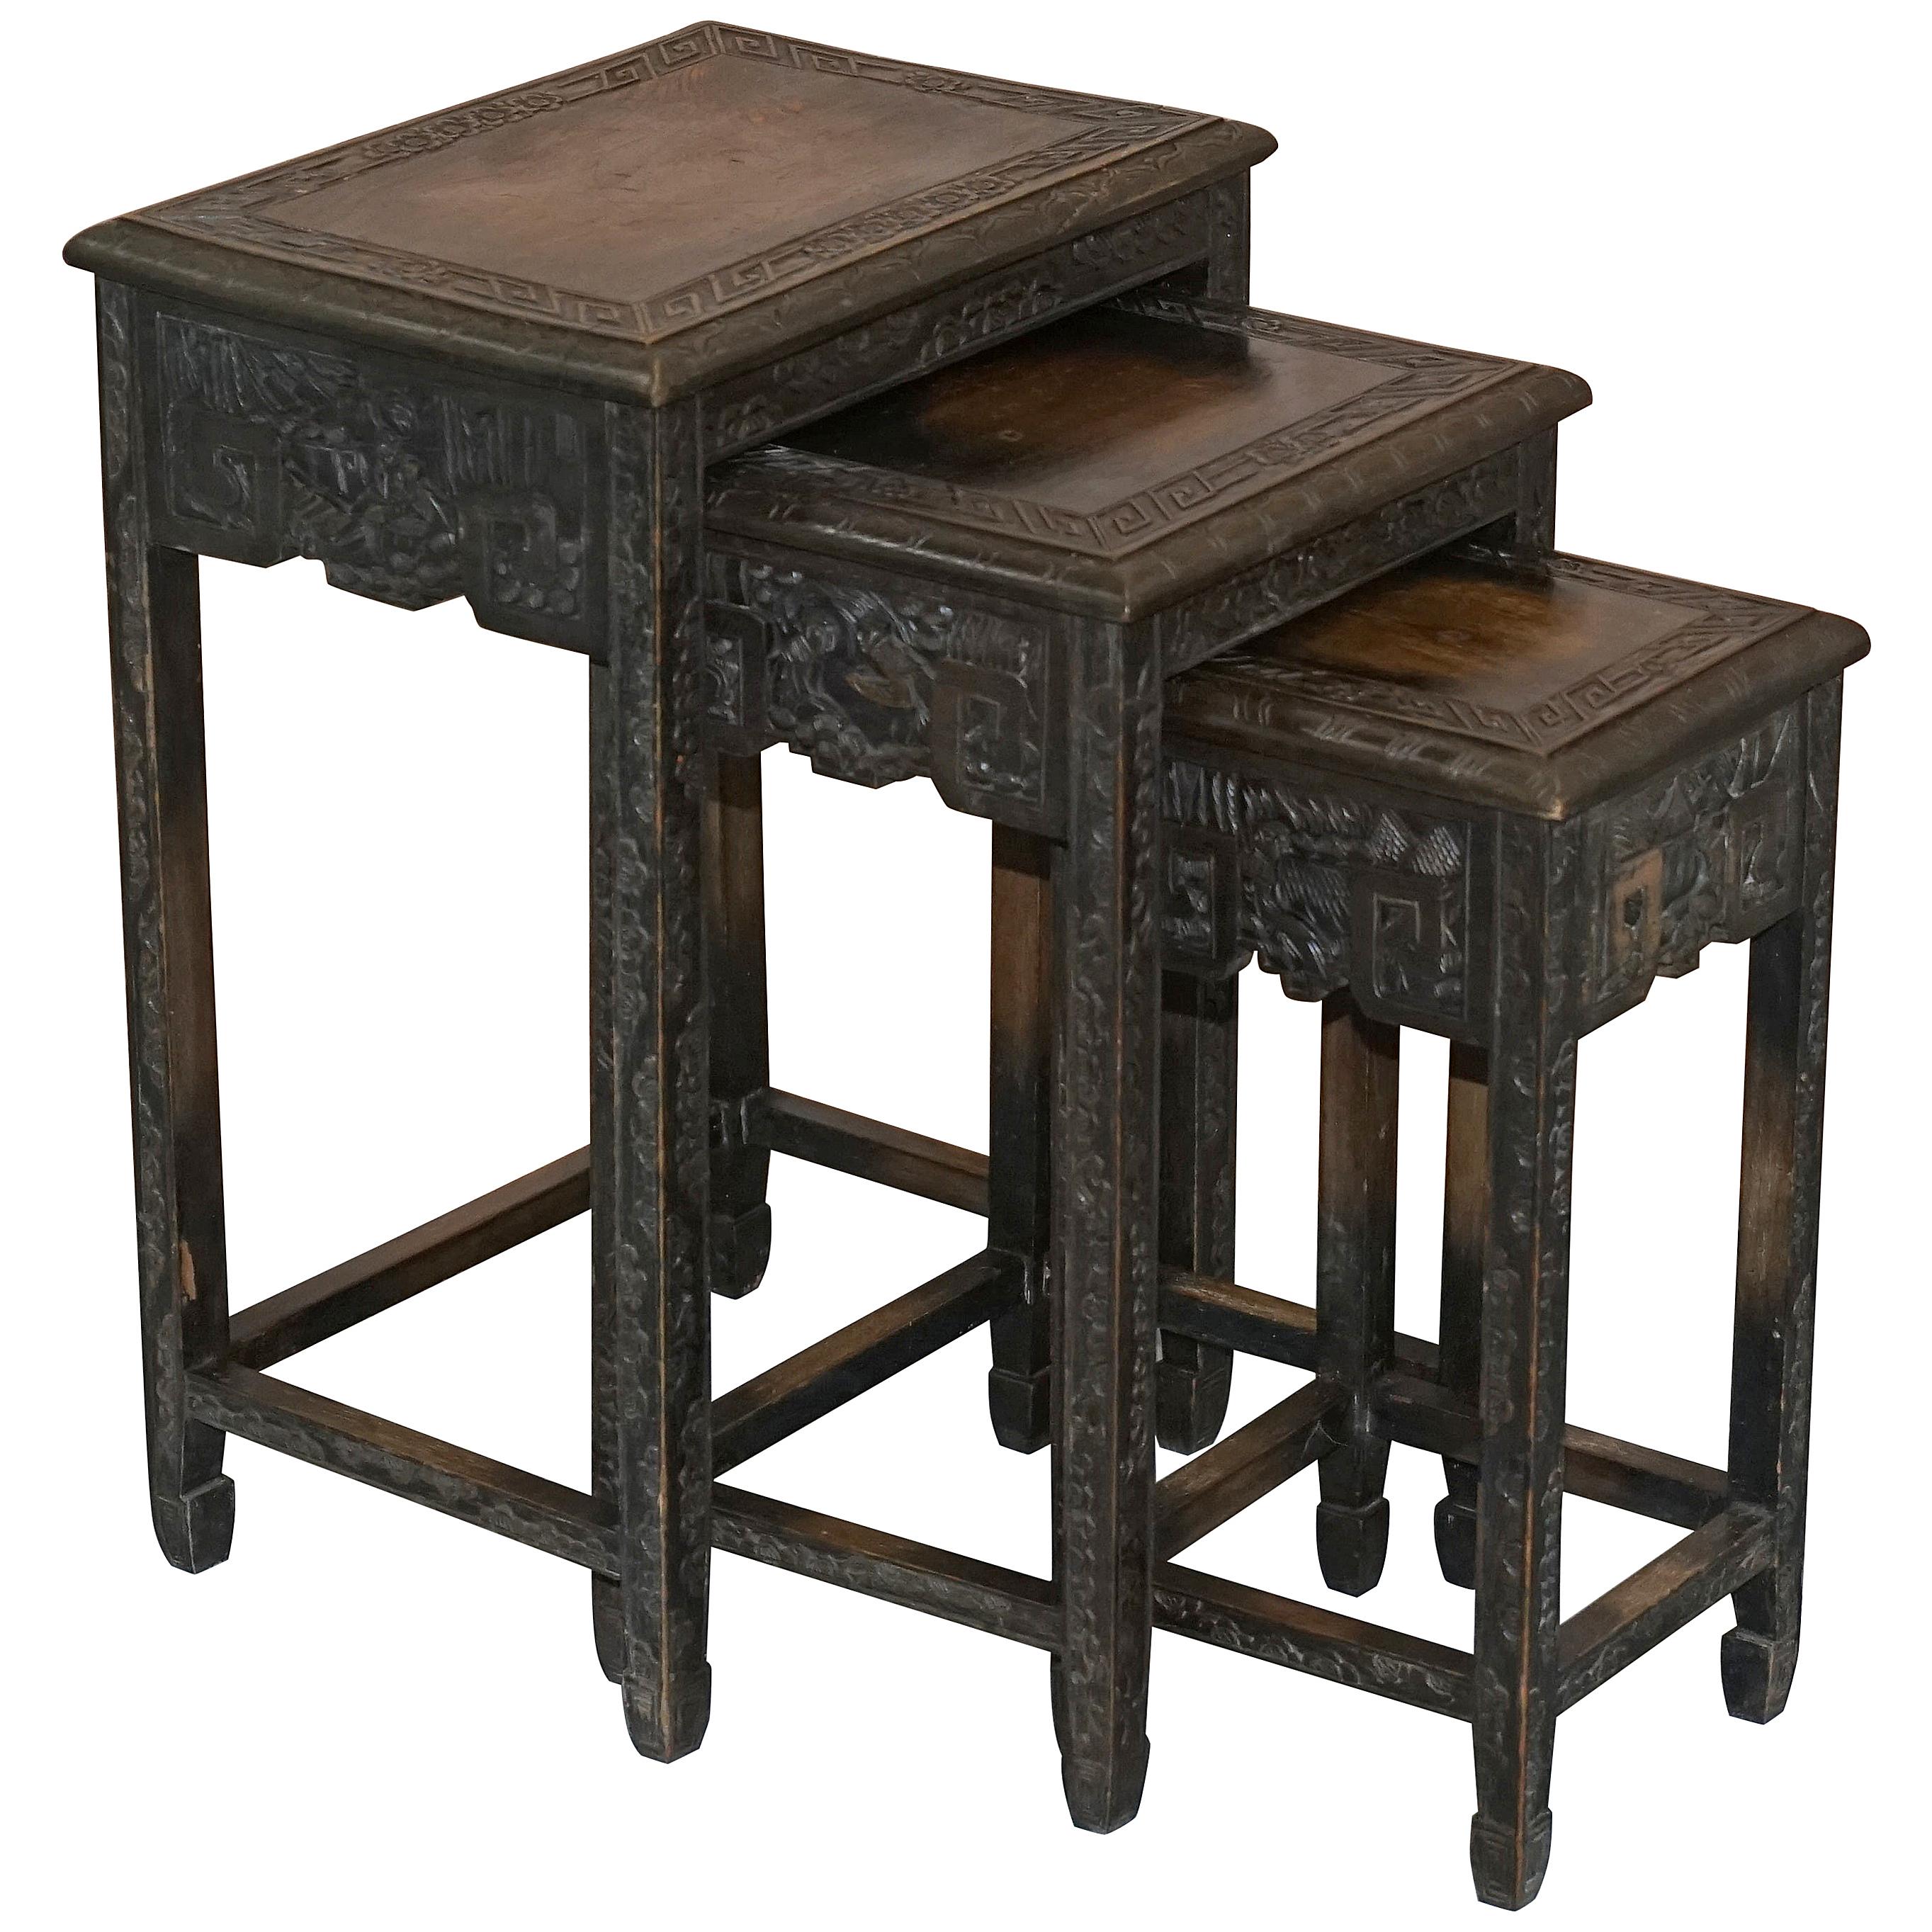 Chinese Export circa 1900 Nest of Three Tables Heavily Carved All-Over Ebonized